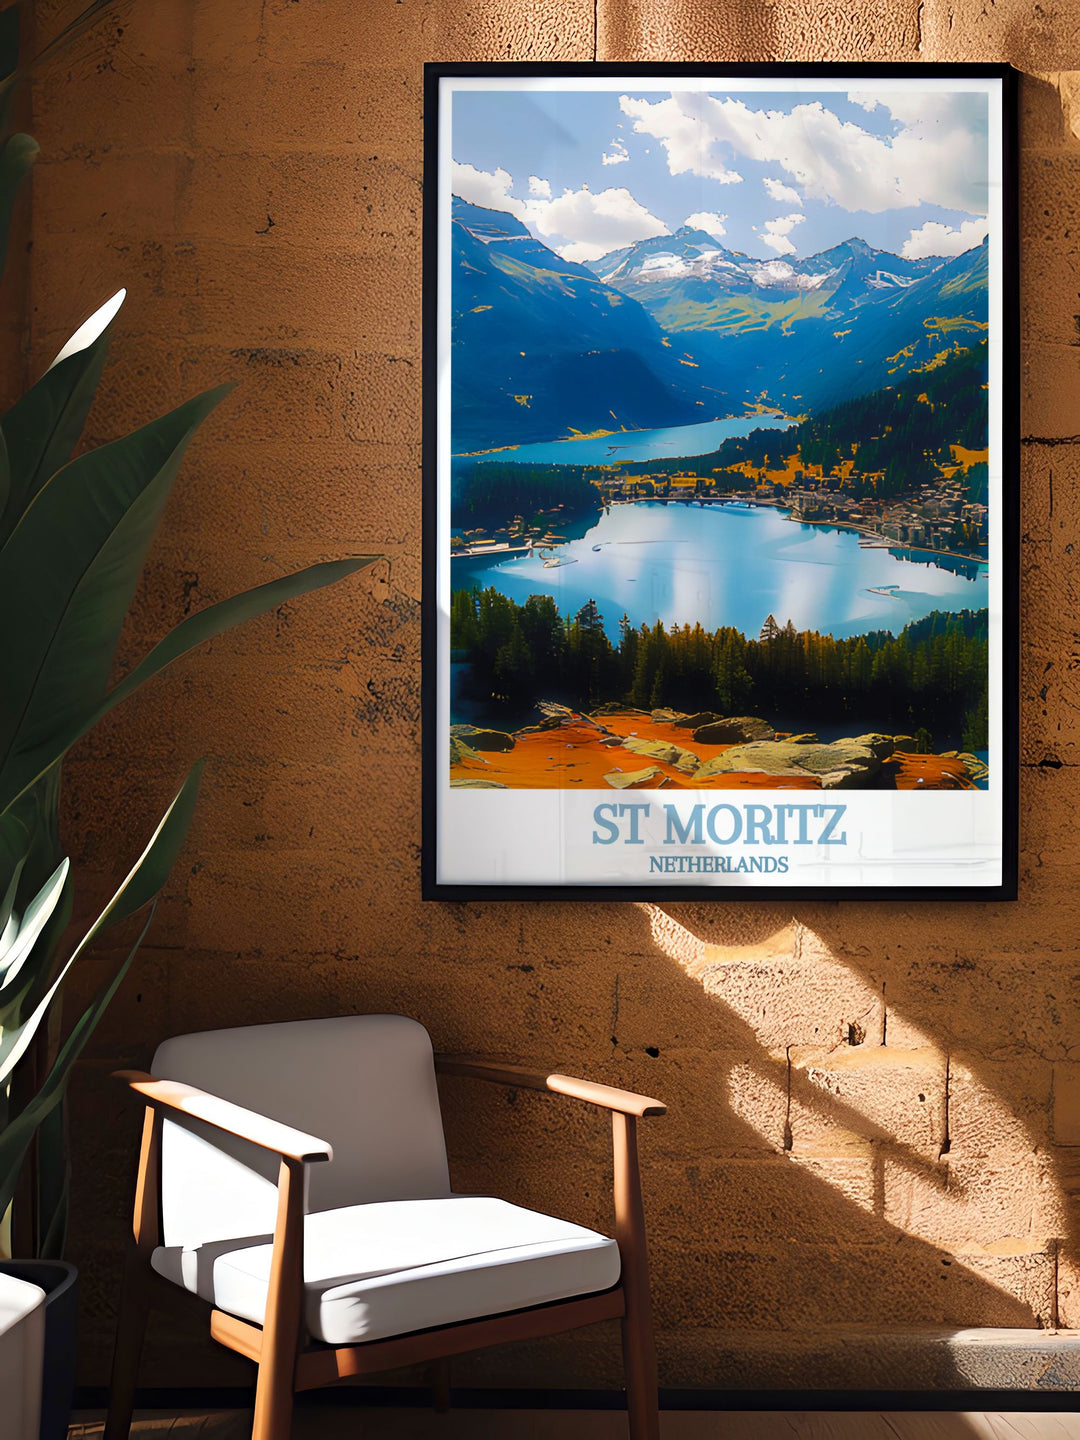 Bring the majestic beauty of Switzerland into your home with this poster, featuring the iconic St Moritz and the serene Engadin Valley.